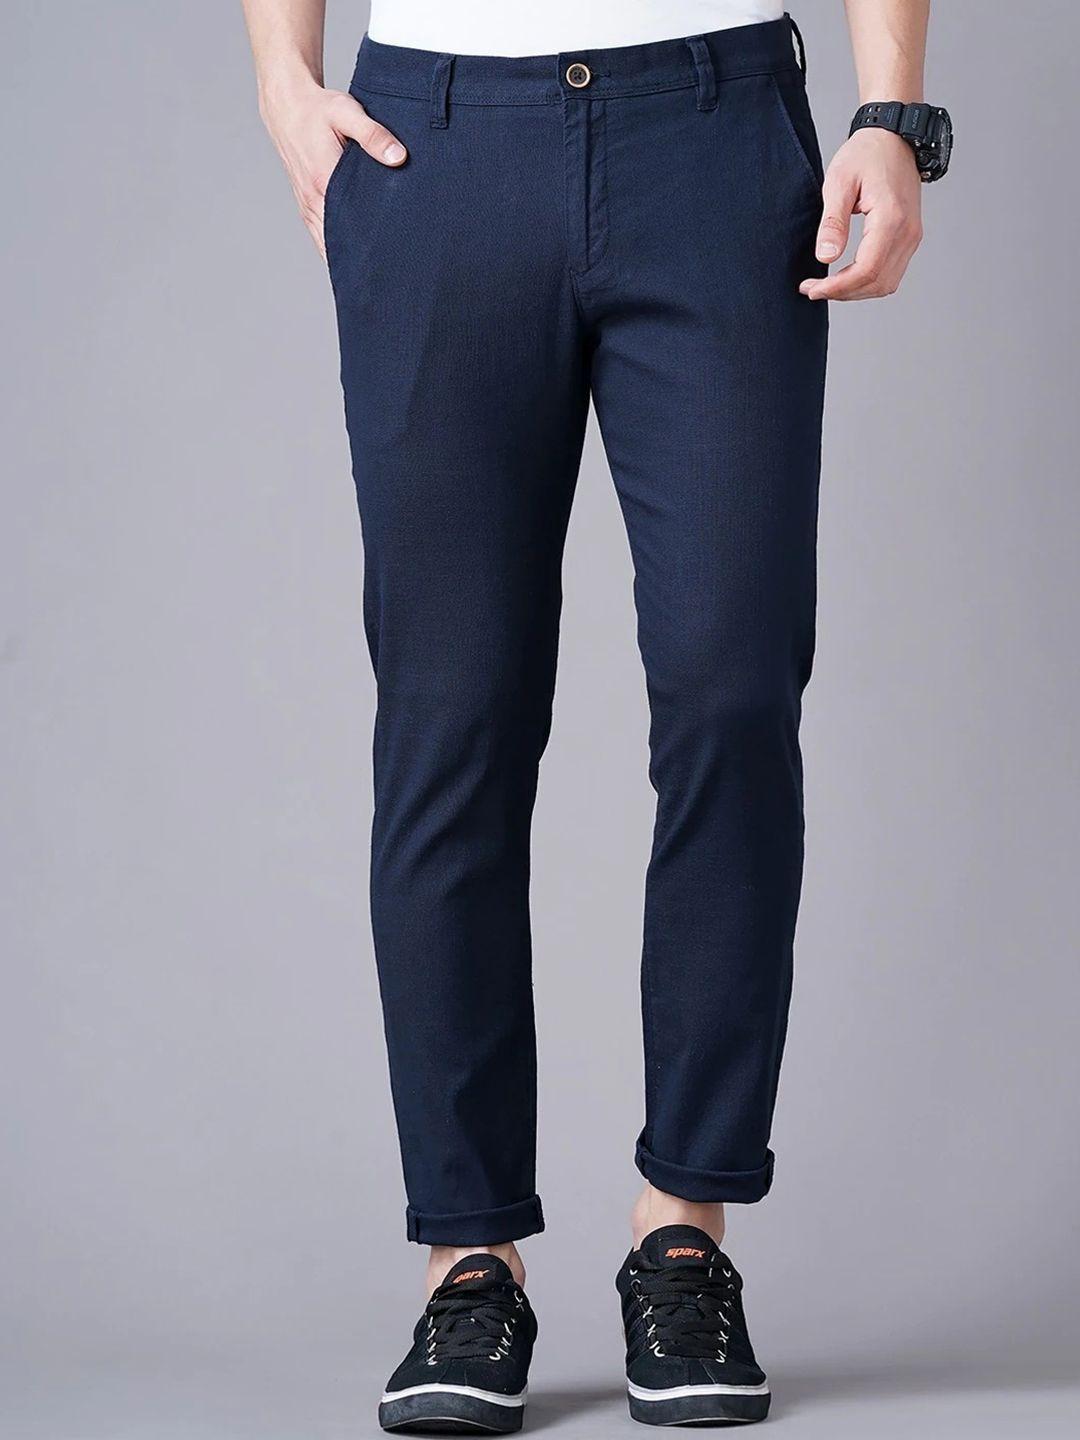 british-club-men-smart-slim-fit-low-rise-chinos-trousers